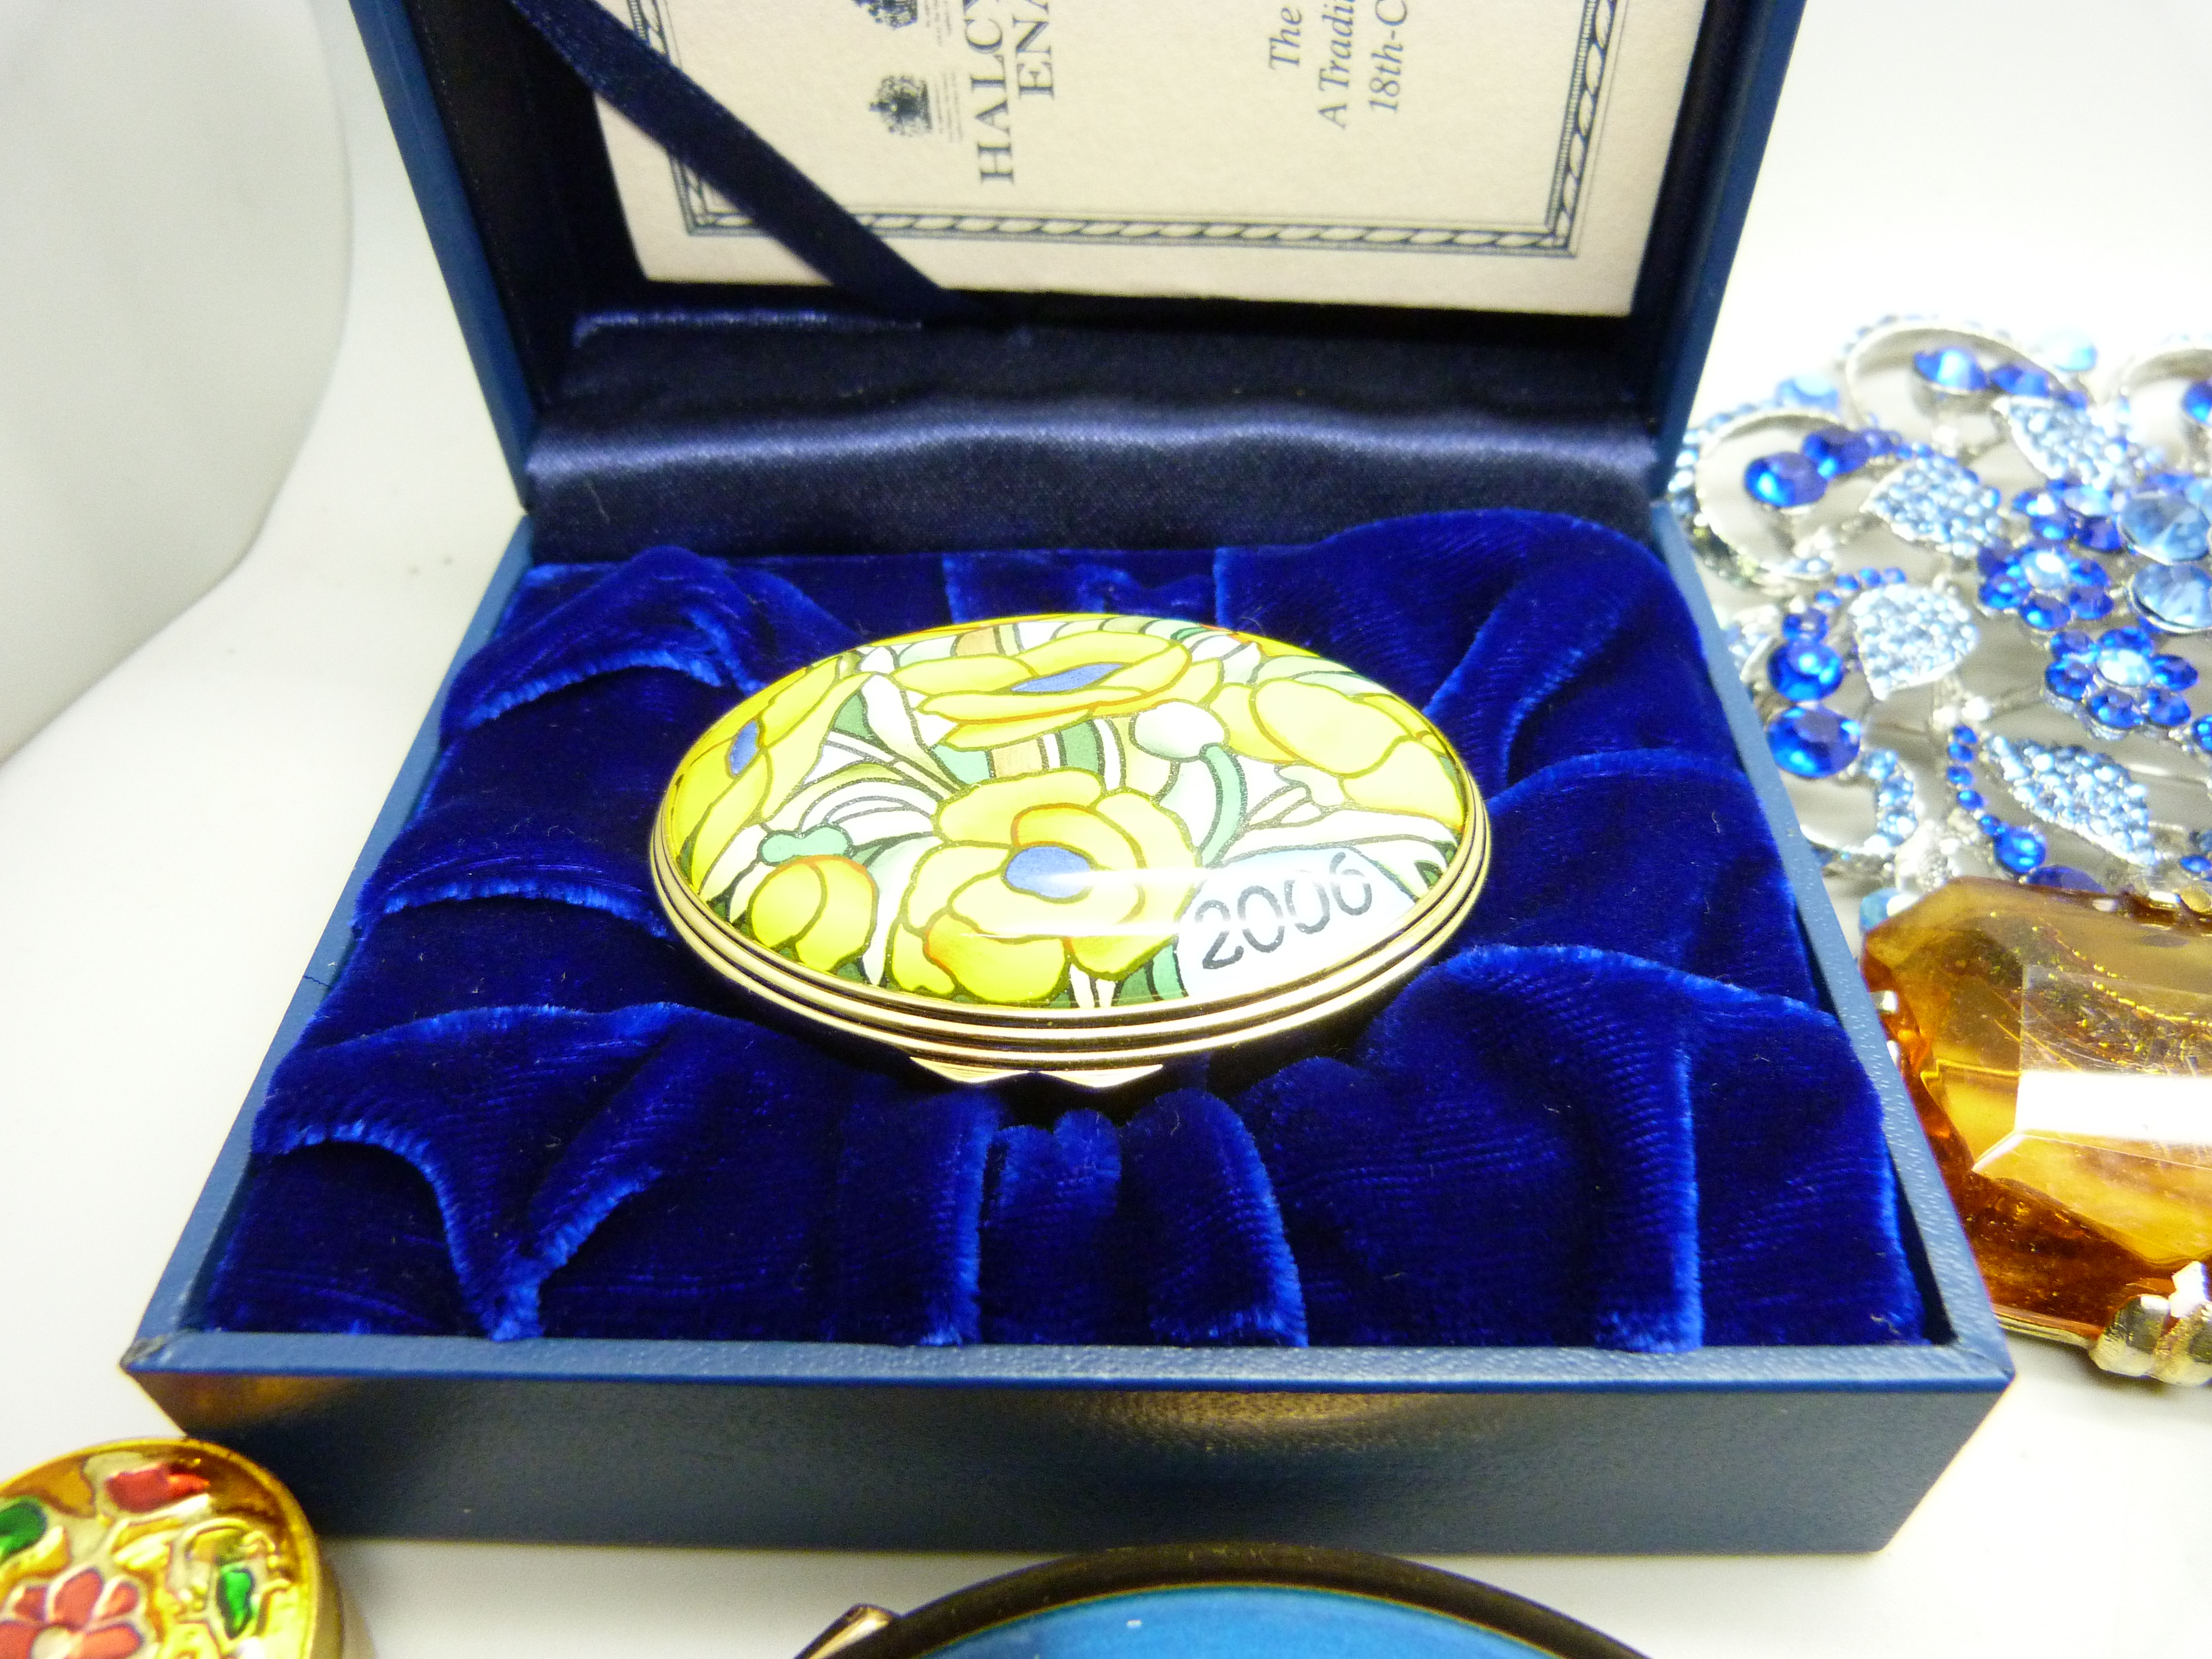 A Halcyon Days enamelled trinket box, a Stratton compact and a collection of brooches, bracelets and - Bild 2 aus 6